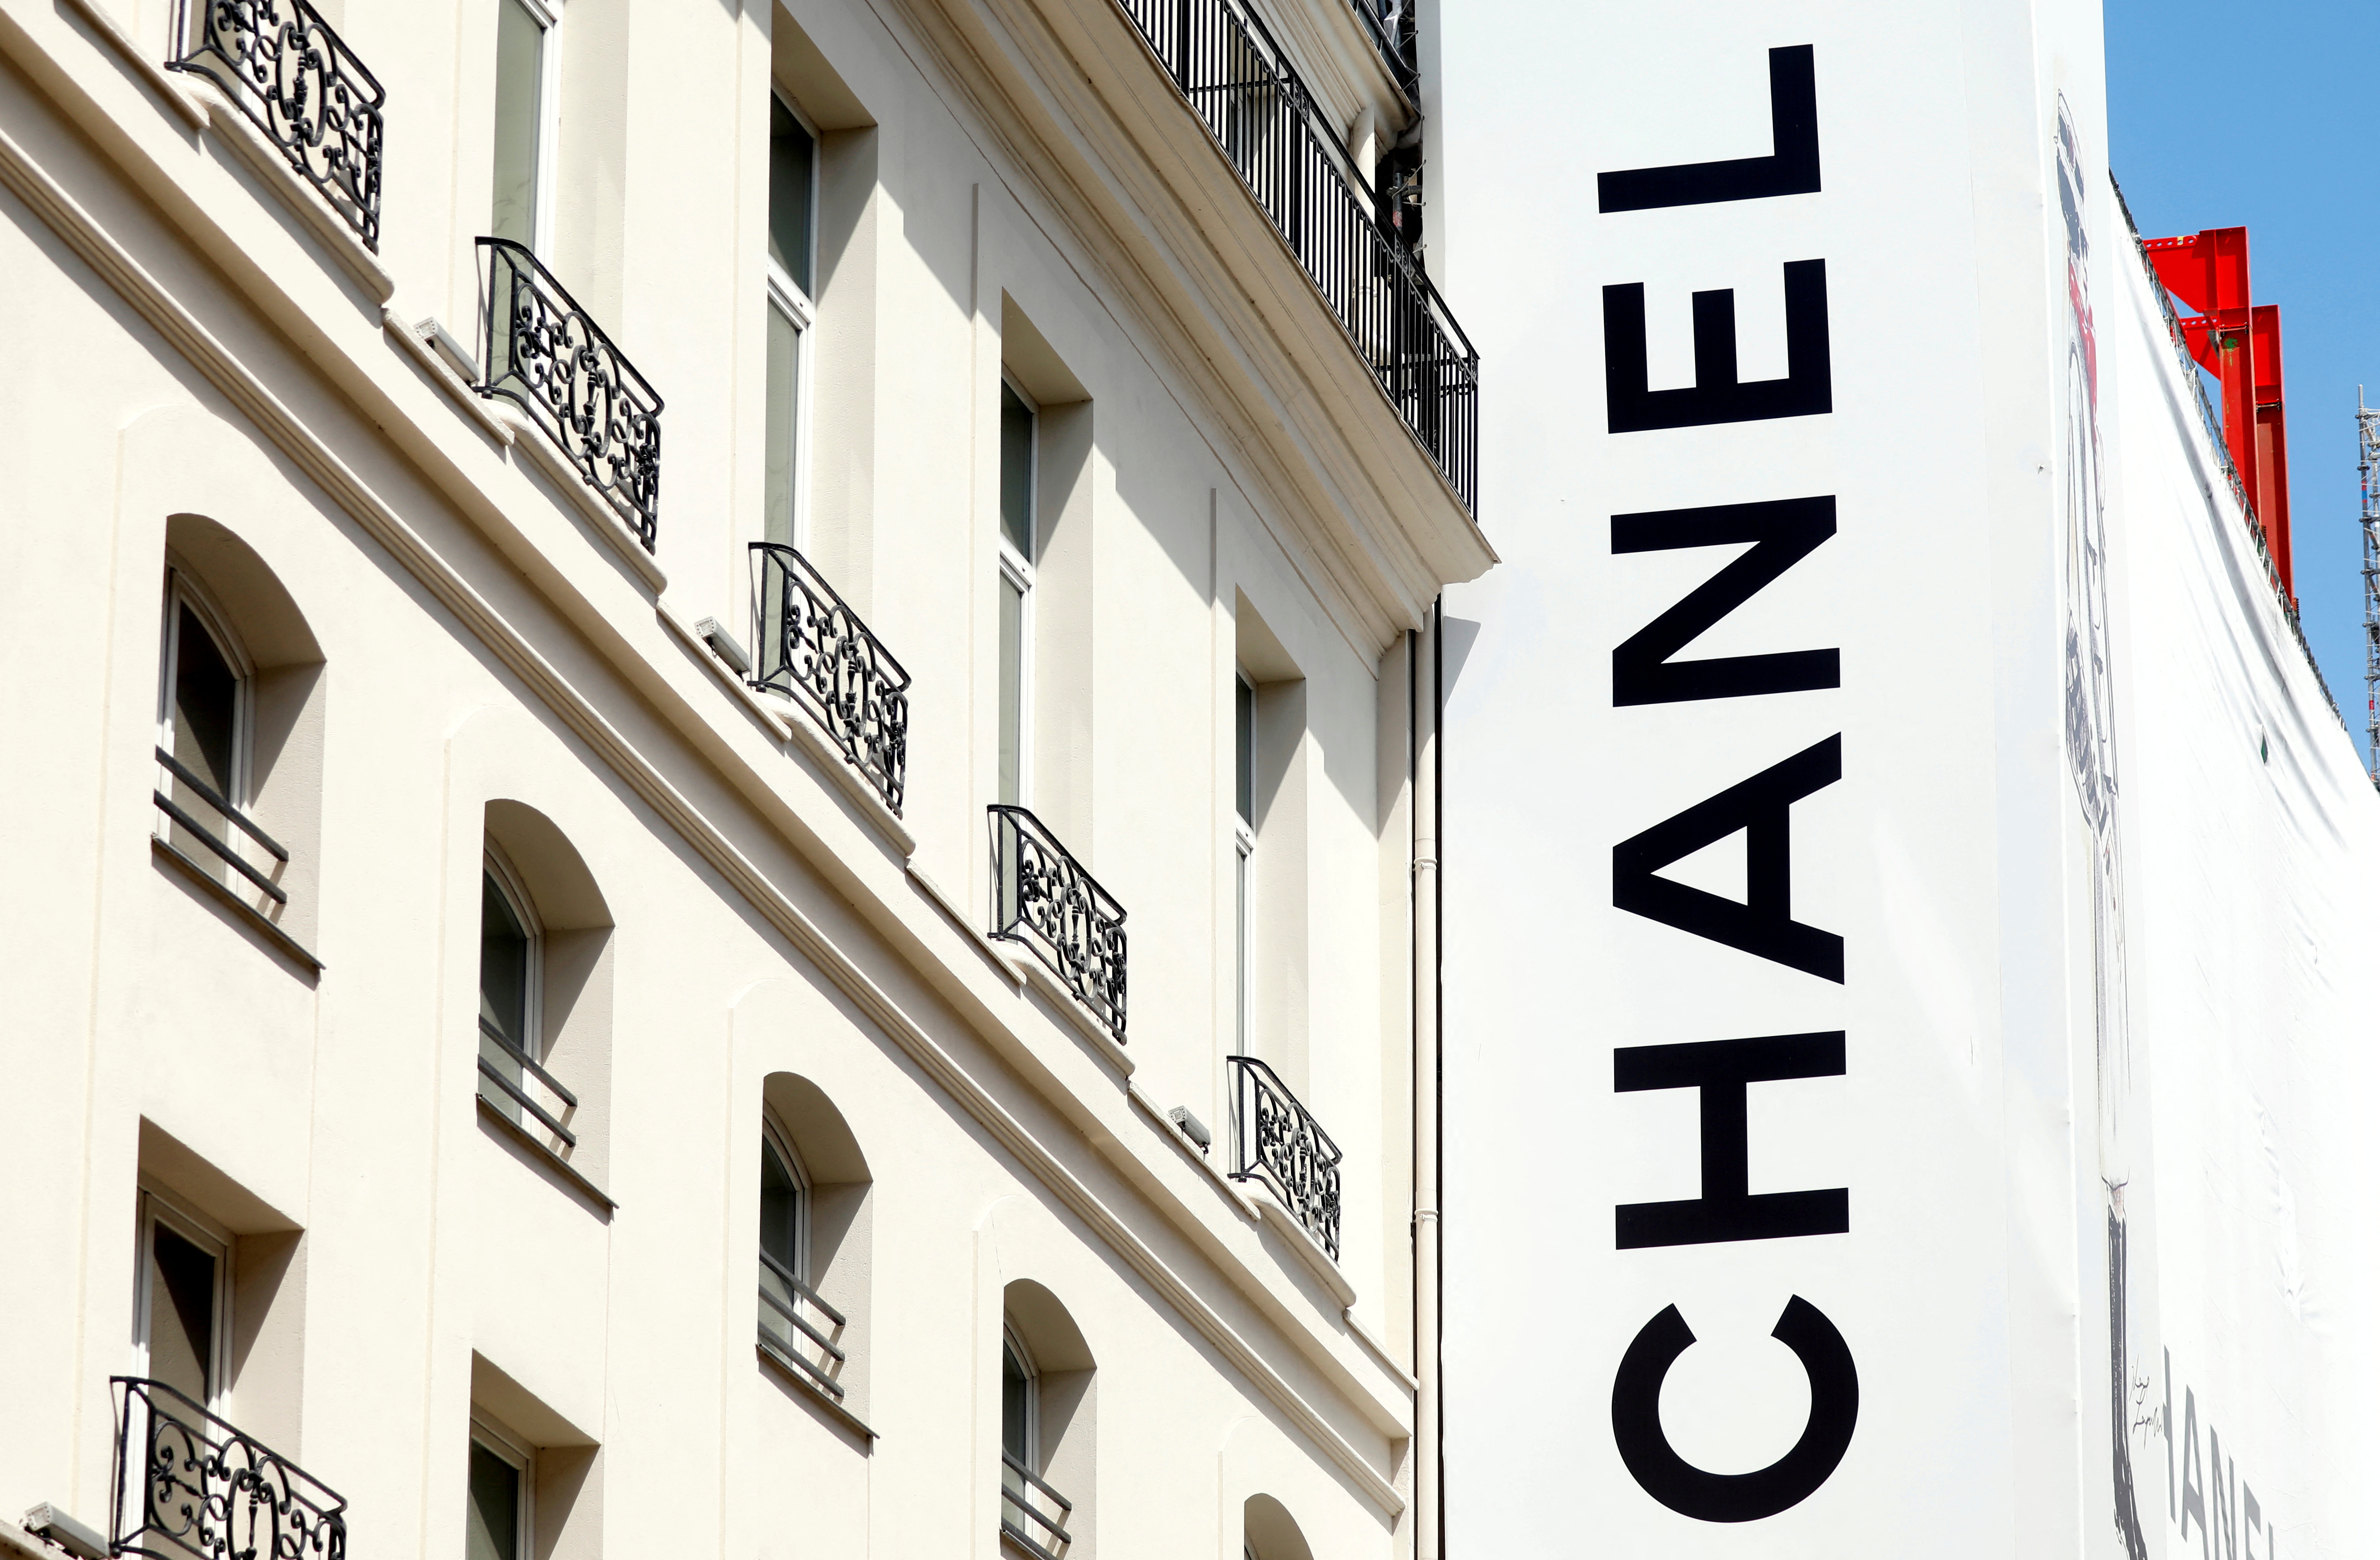 CHANEL GLOBAL PRICE INCREASE MARCH 2023